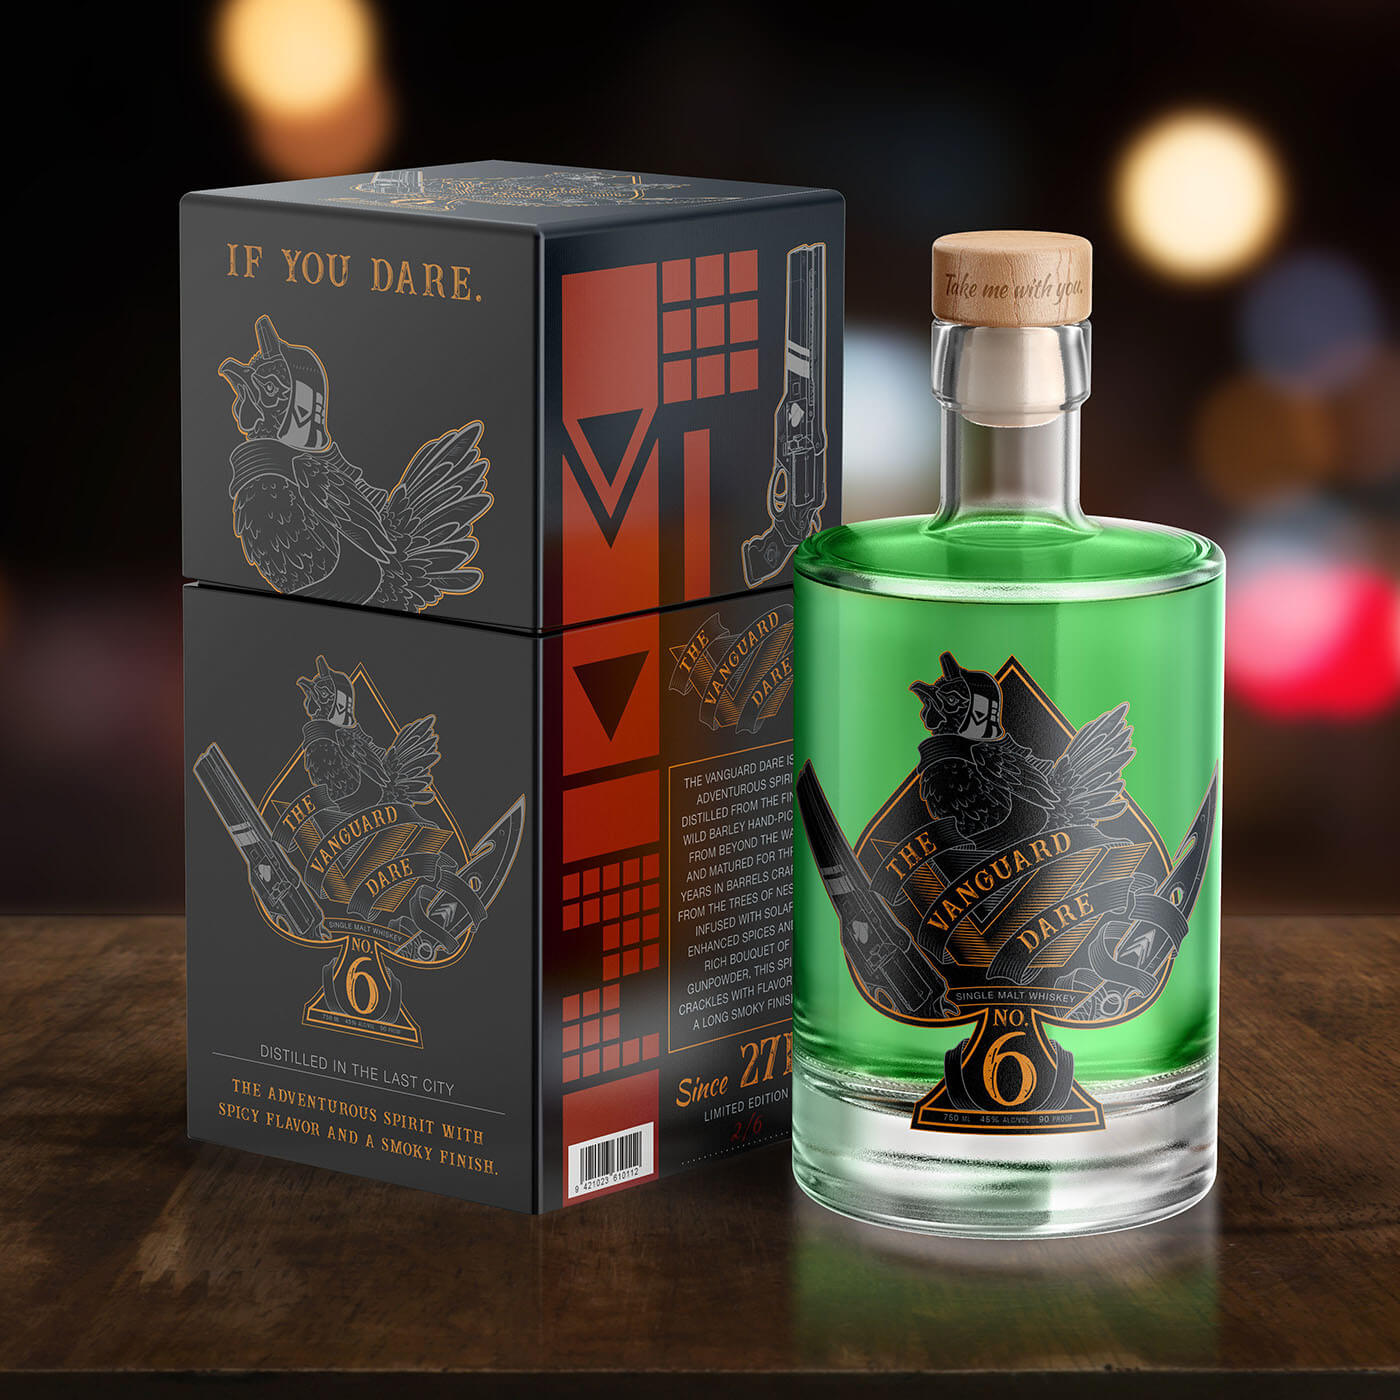 Green variant of "The Vanguard Dare" whiskey packaging design, to match the "Last Call" teaser trailer.